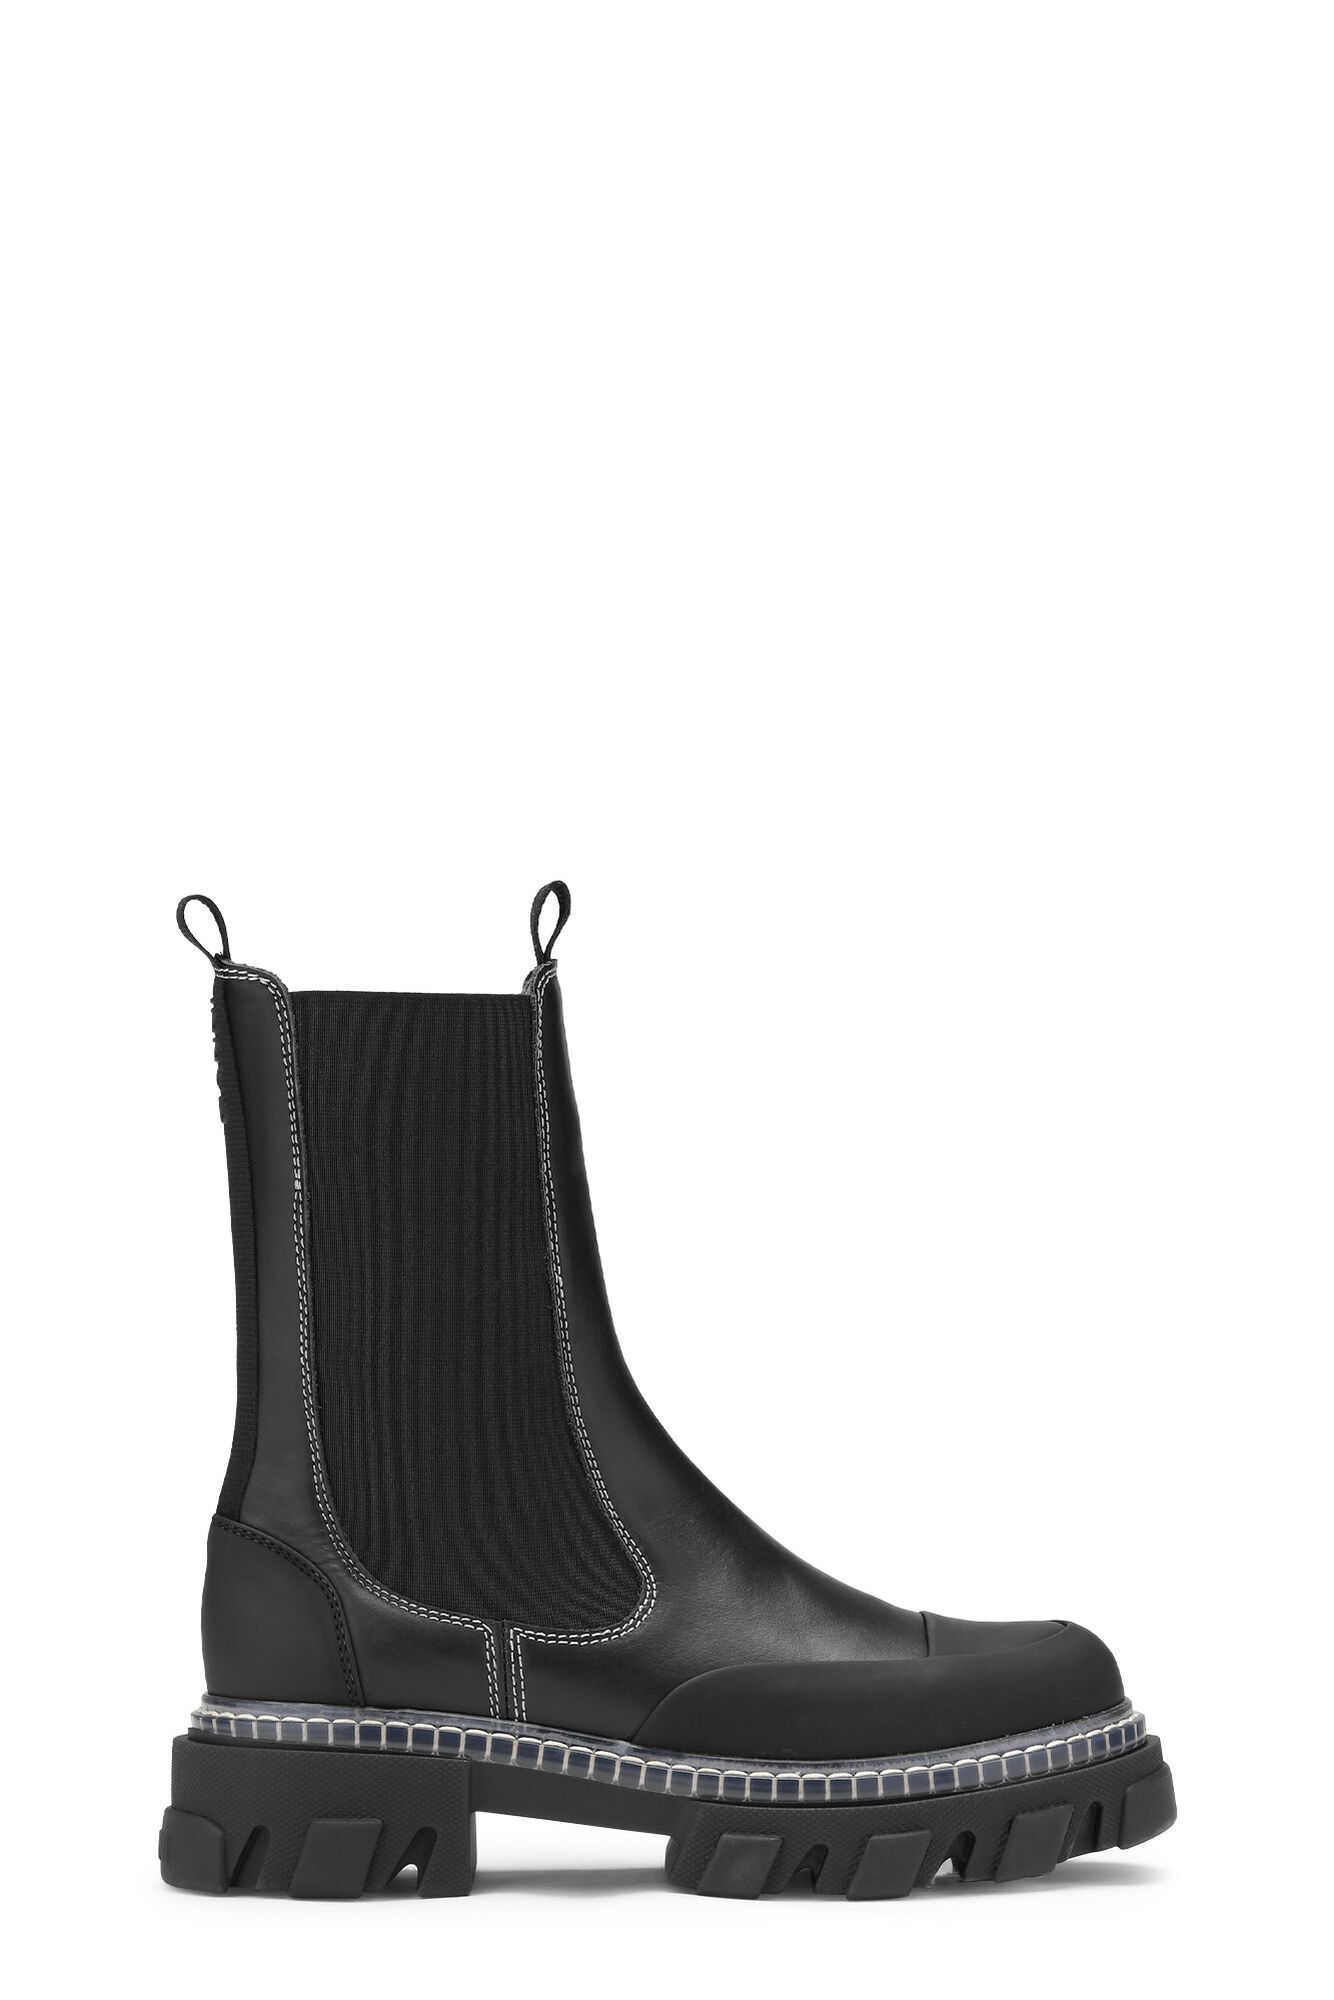 cleated mid chelsea boots